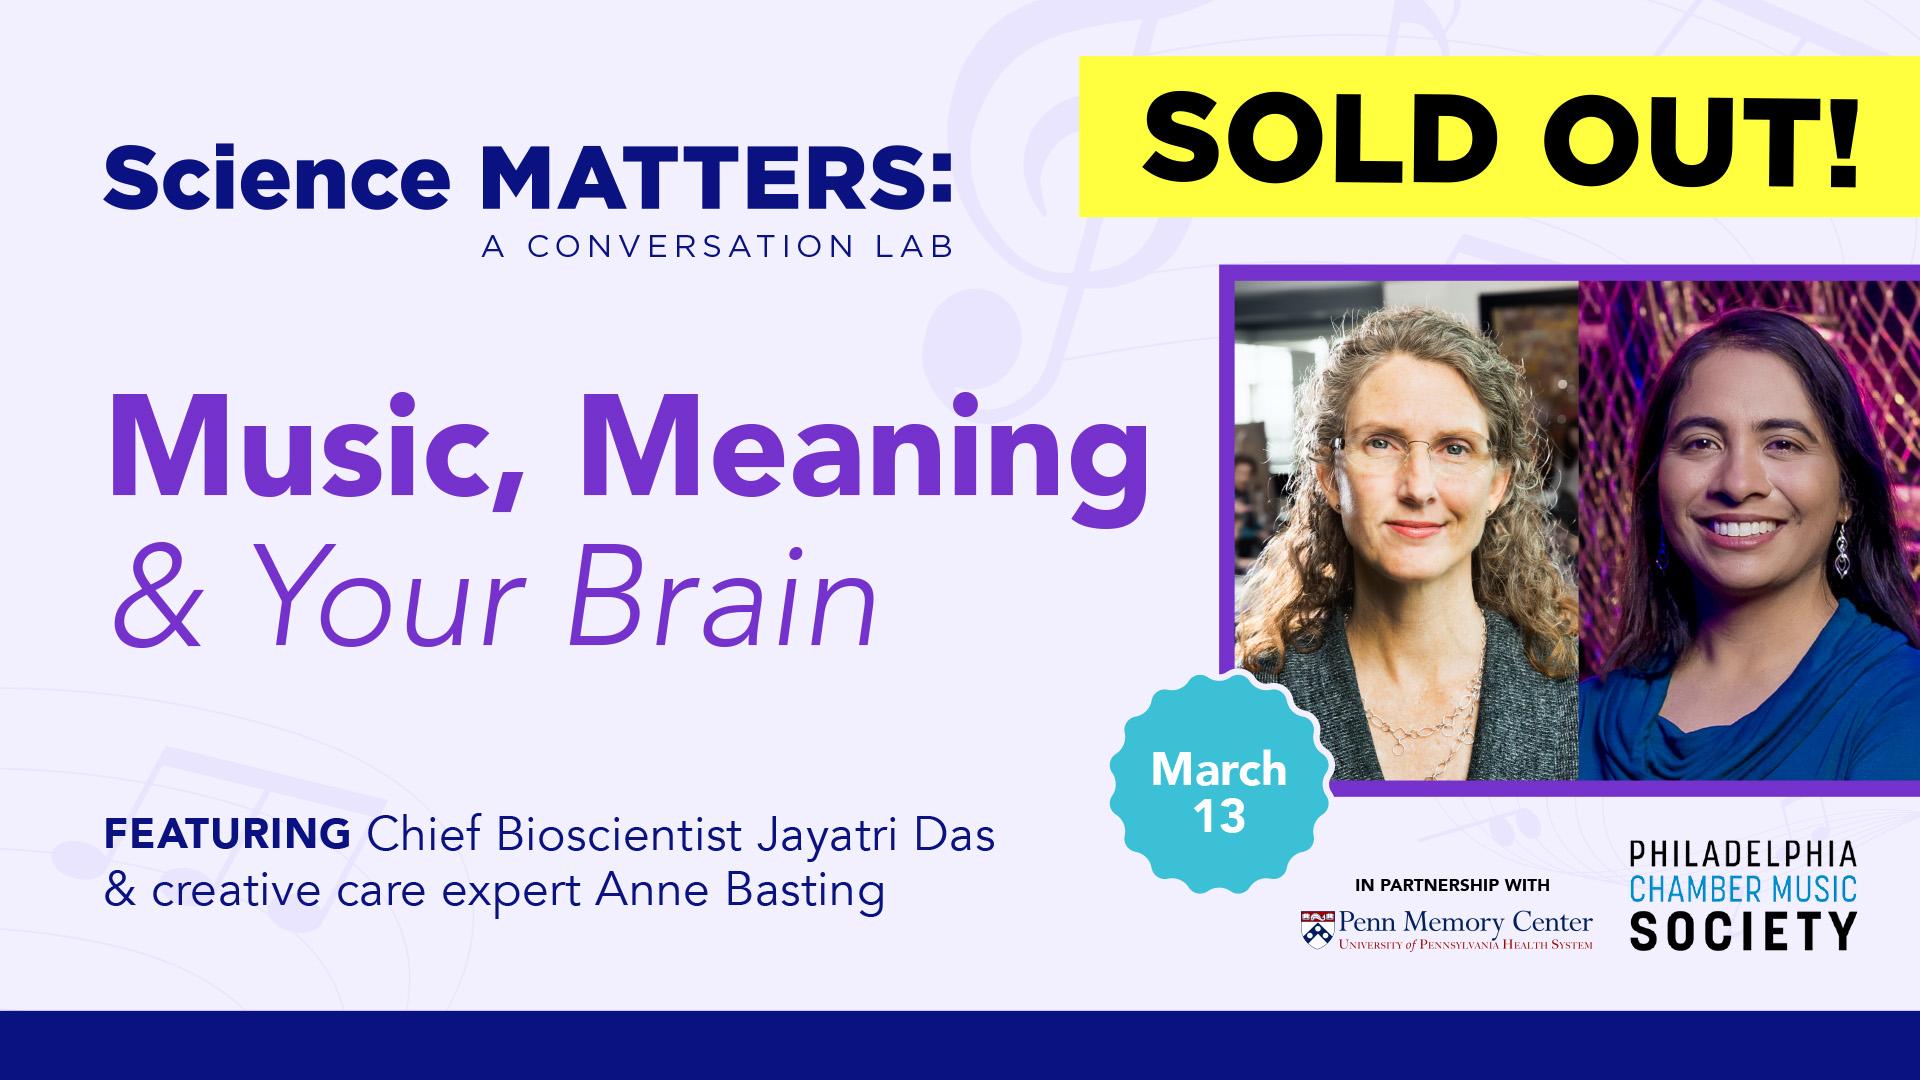 SOLD OUT! Science Matters: A Conversation Lab | Music, Meaning & Your Brain | March 13